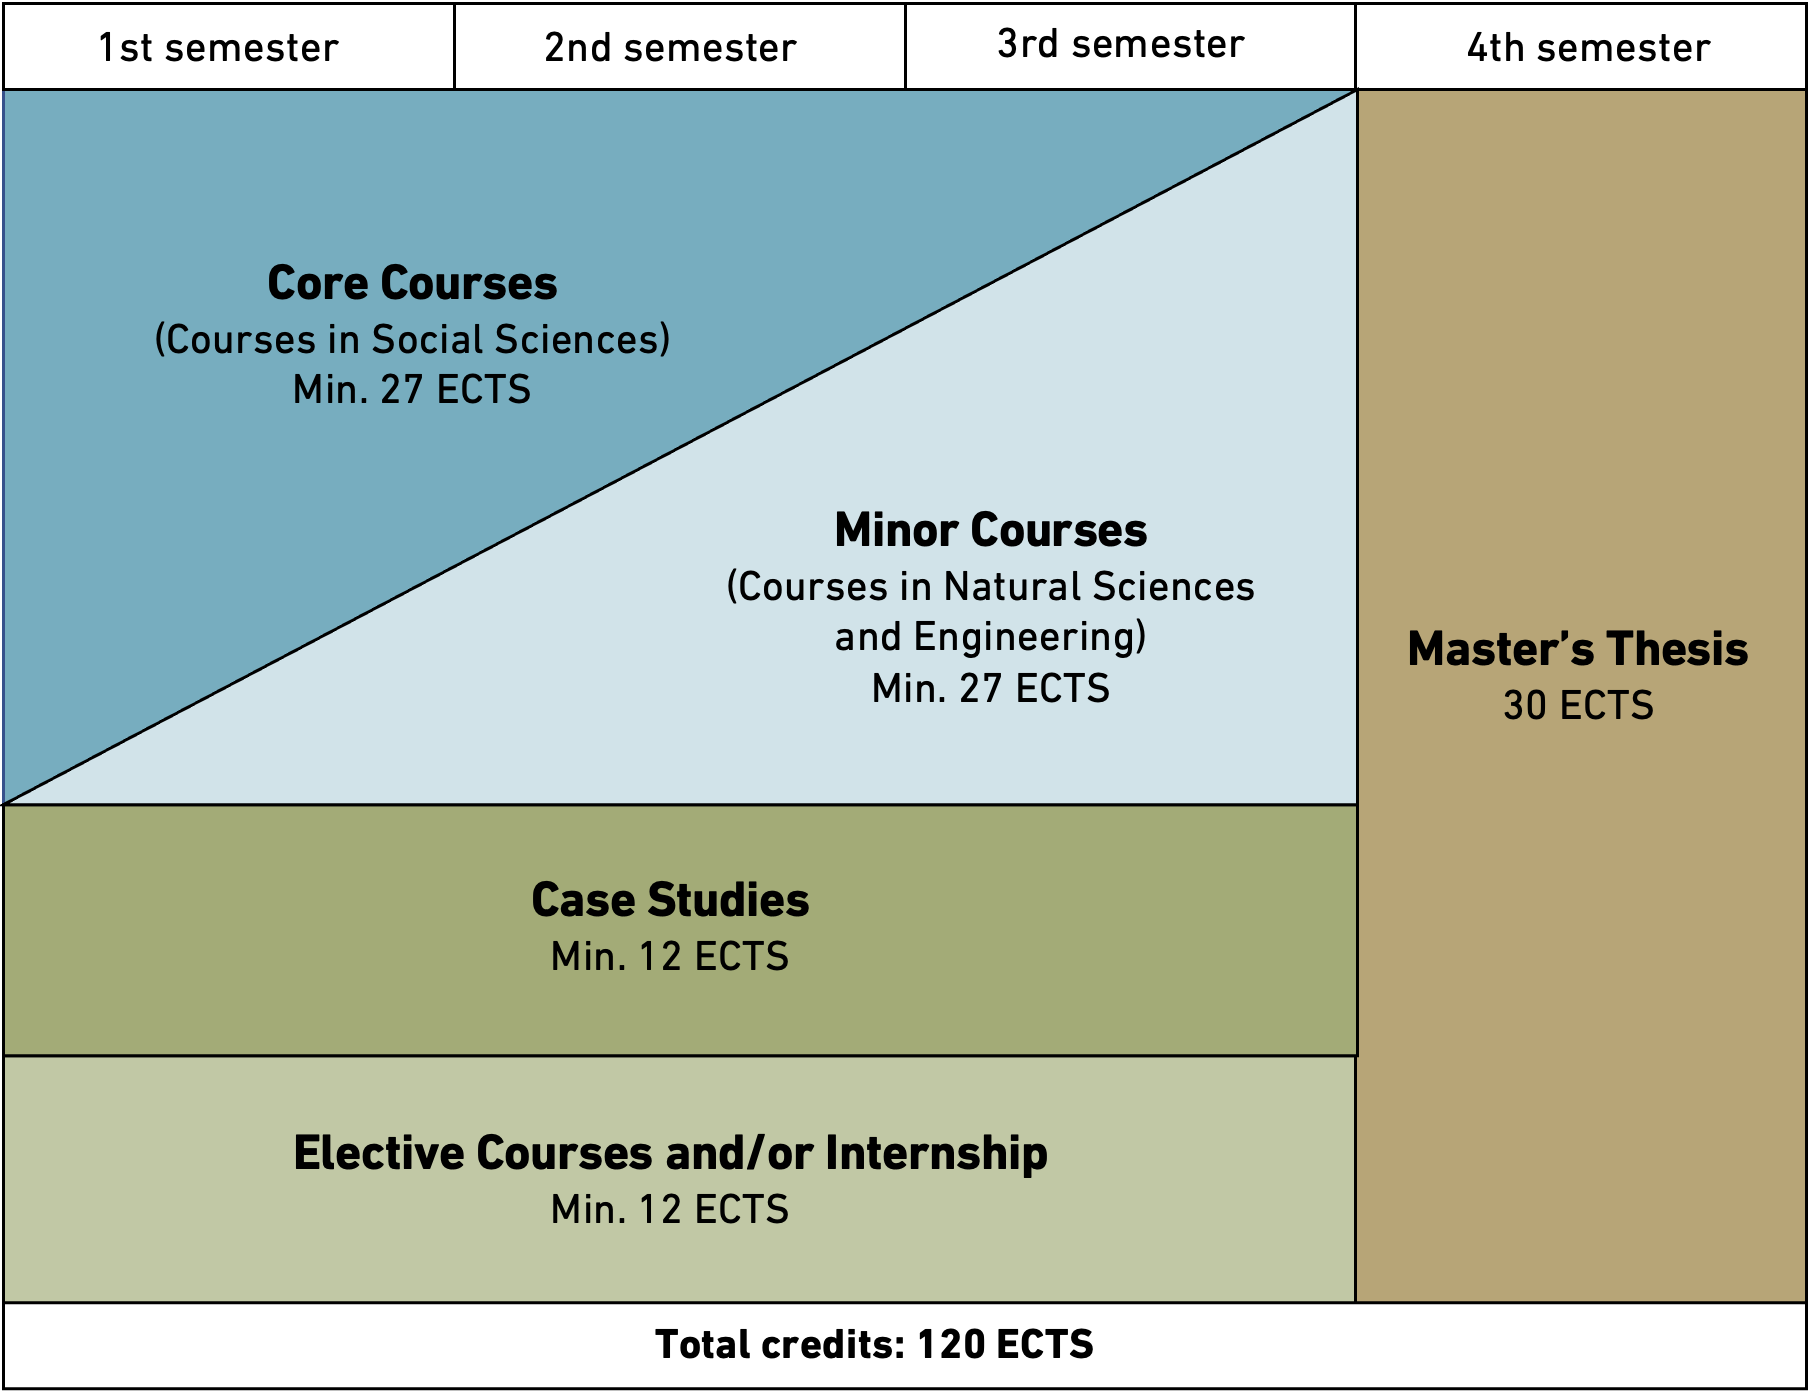 MSc of Science, Technology and Policy programme schedule with corresponding ECTS points.  Semesters 1-3: Minimum of 27 ECTS of core courses, minimum of 27 ECTS of minor courses, minimum of 12 ECTS of case studies, and a minimum of 12 ECTS of Electives and/or an internship.  Semester 4: Master thesis of 30 ECTS.